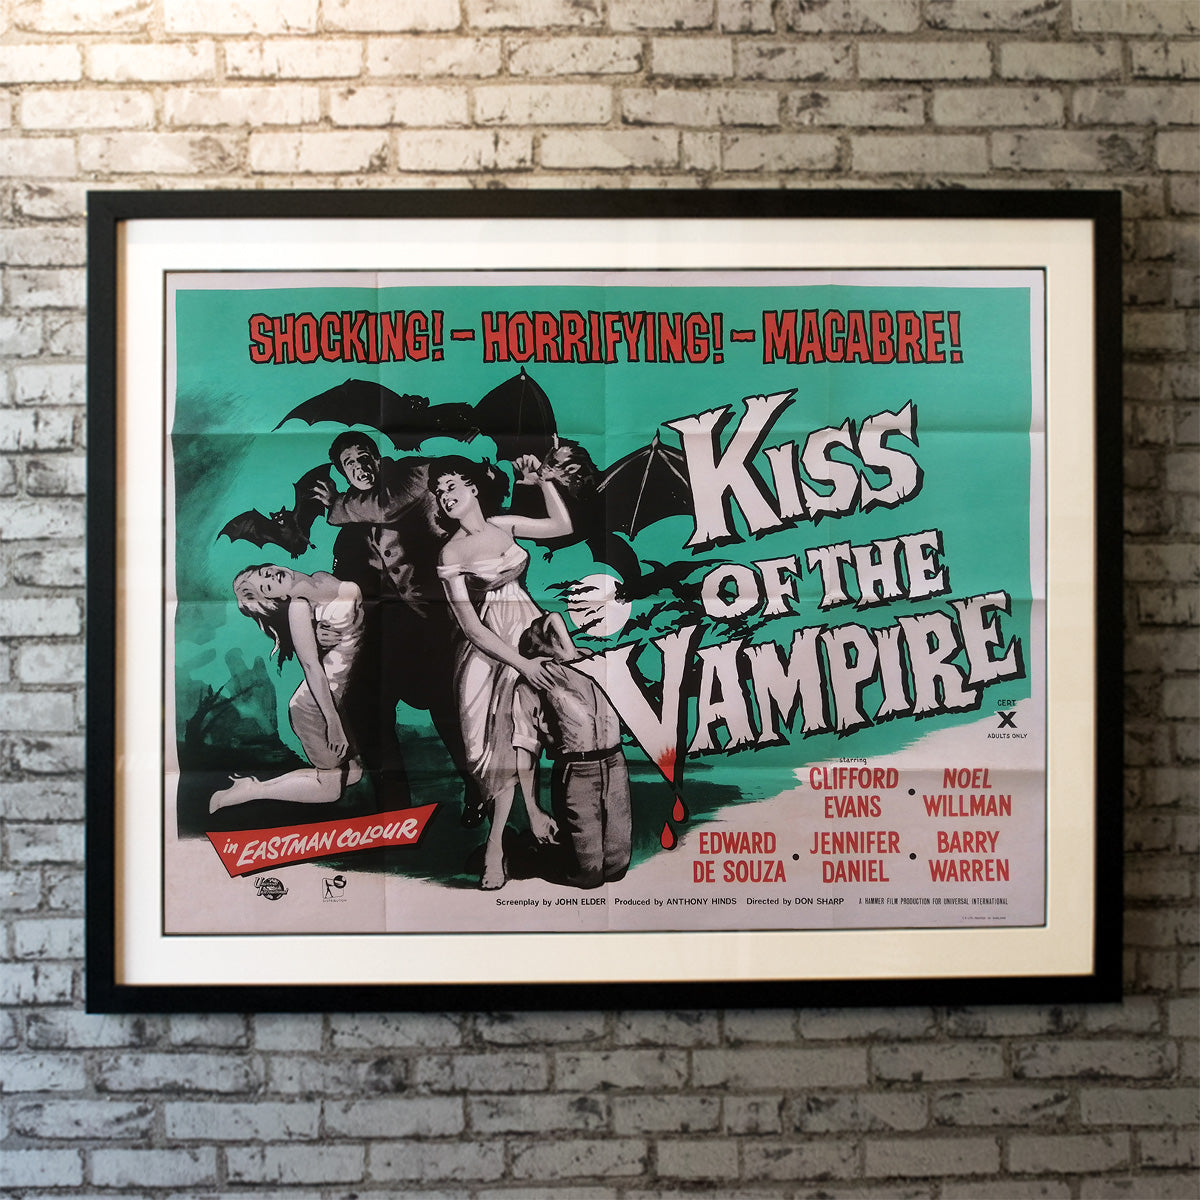 Original Movie Poster of Kiss Of The Vampire, The (1963)